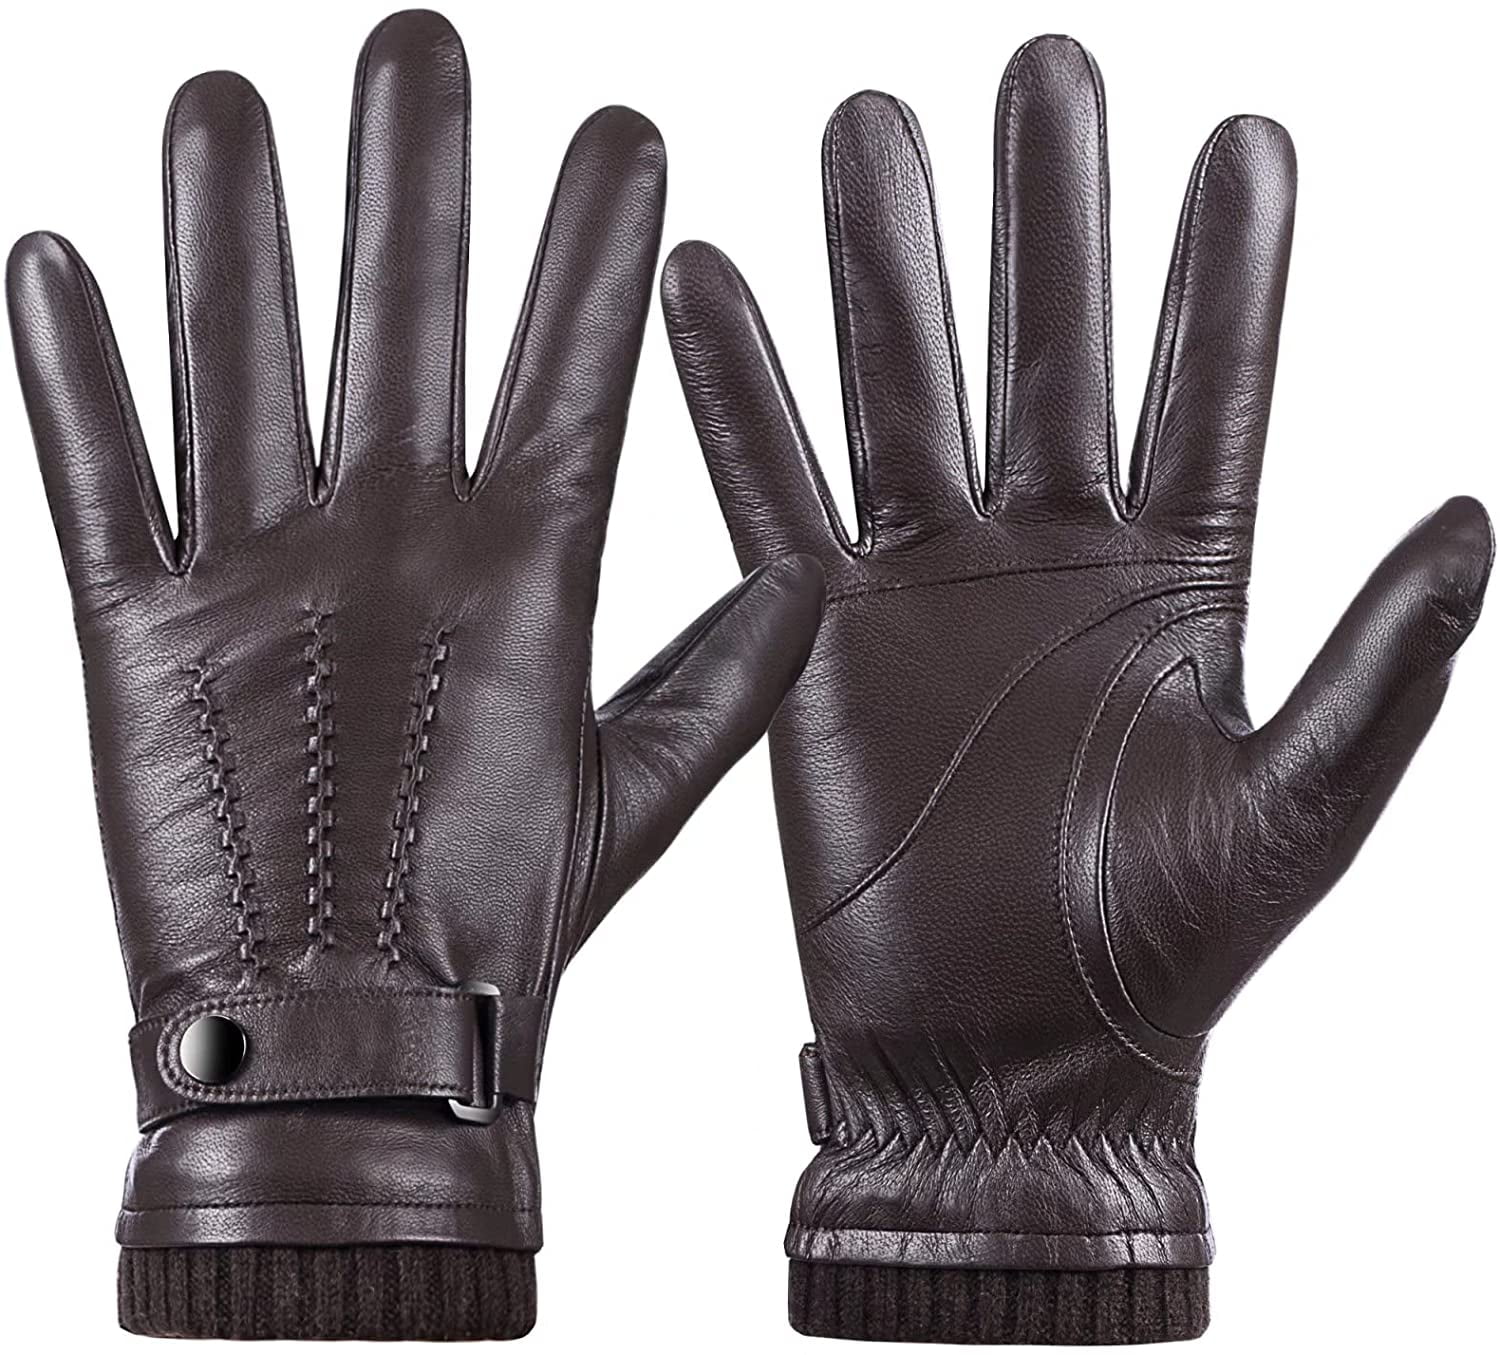 HOT Mens Cashmere Leather Winter Gloves Driving Super Warm Gloves Mittens Gifts